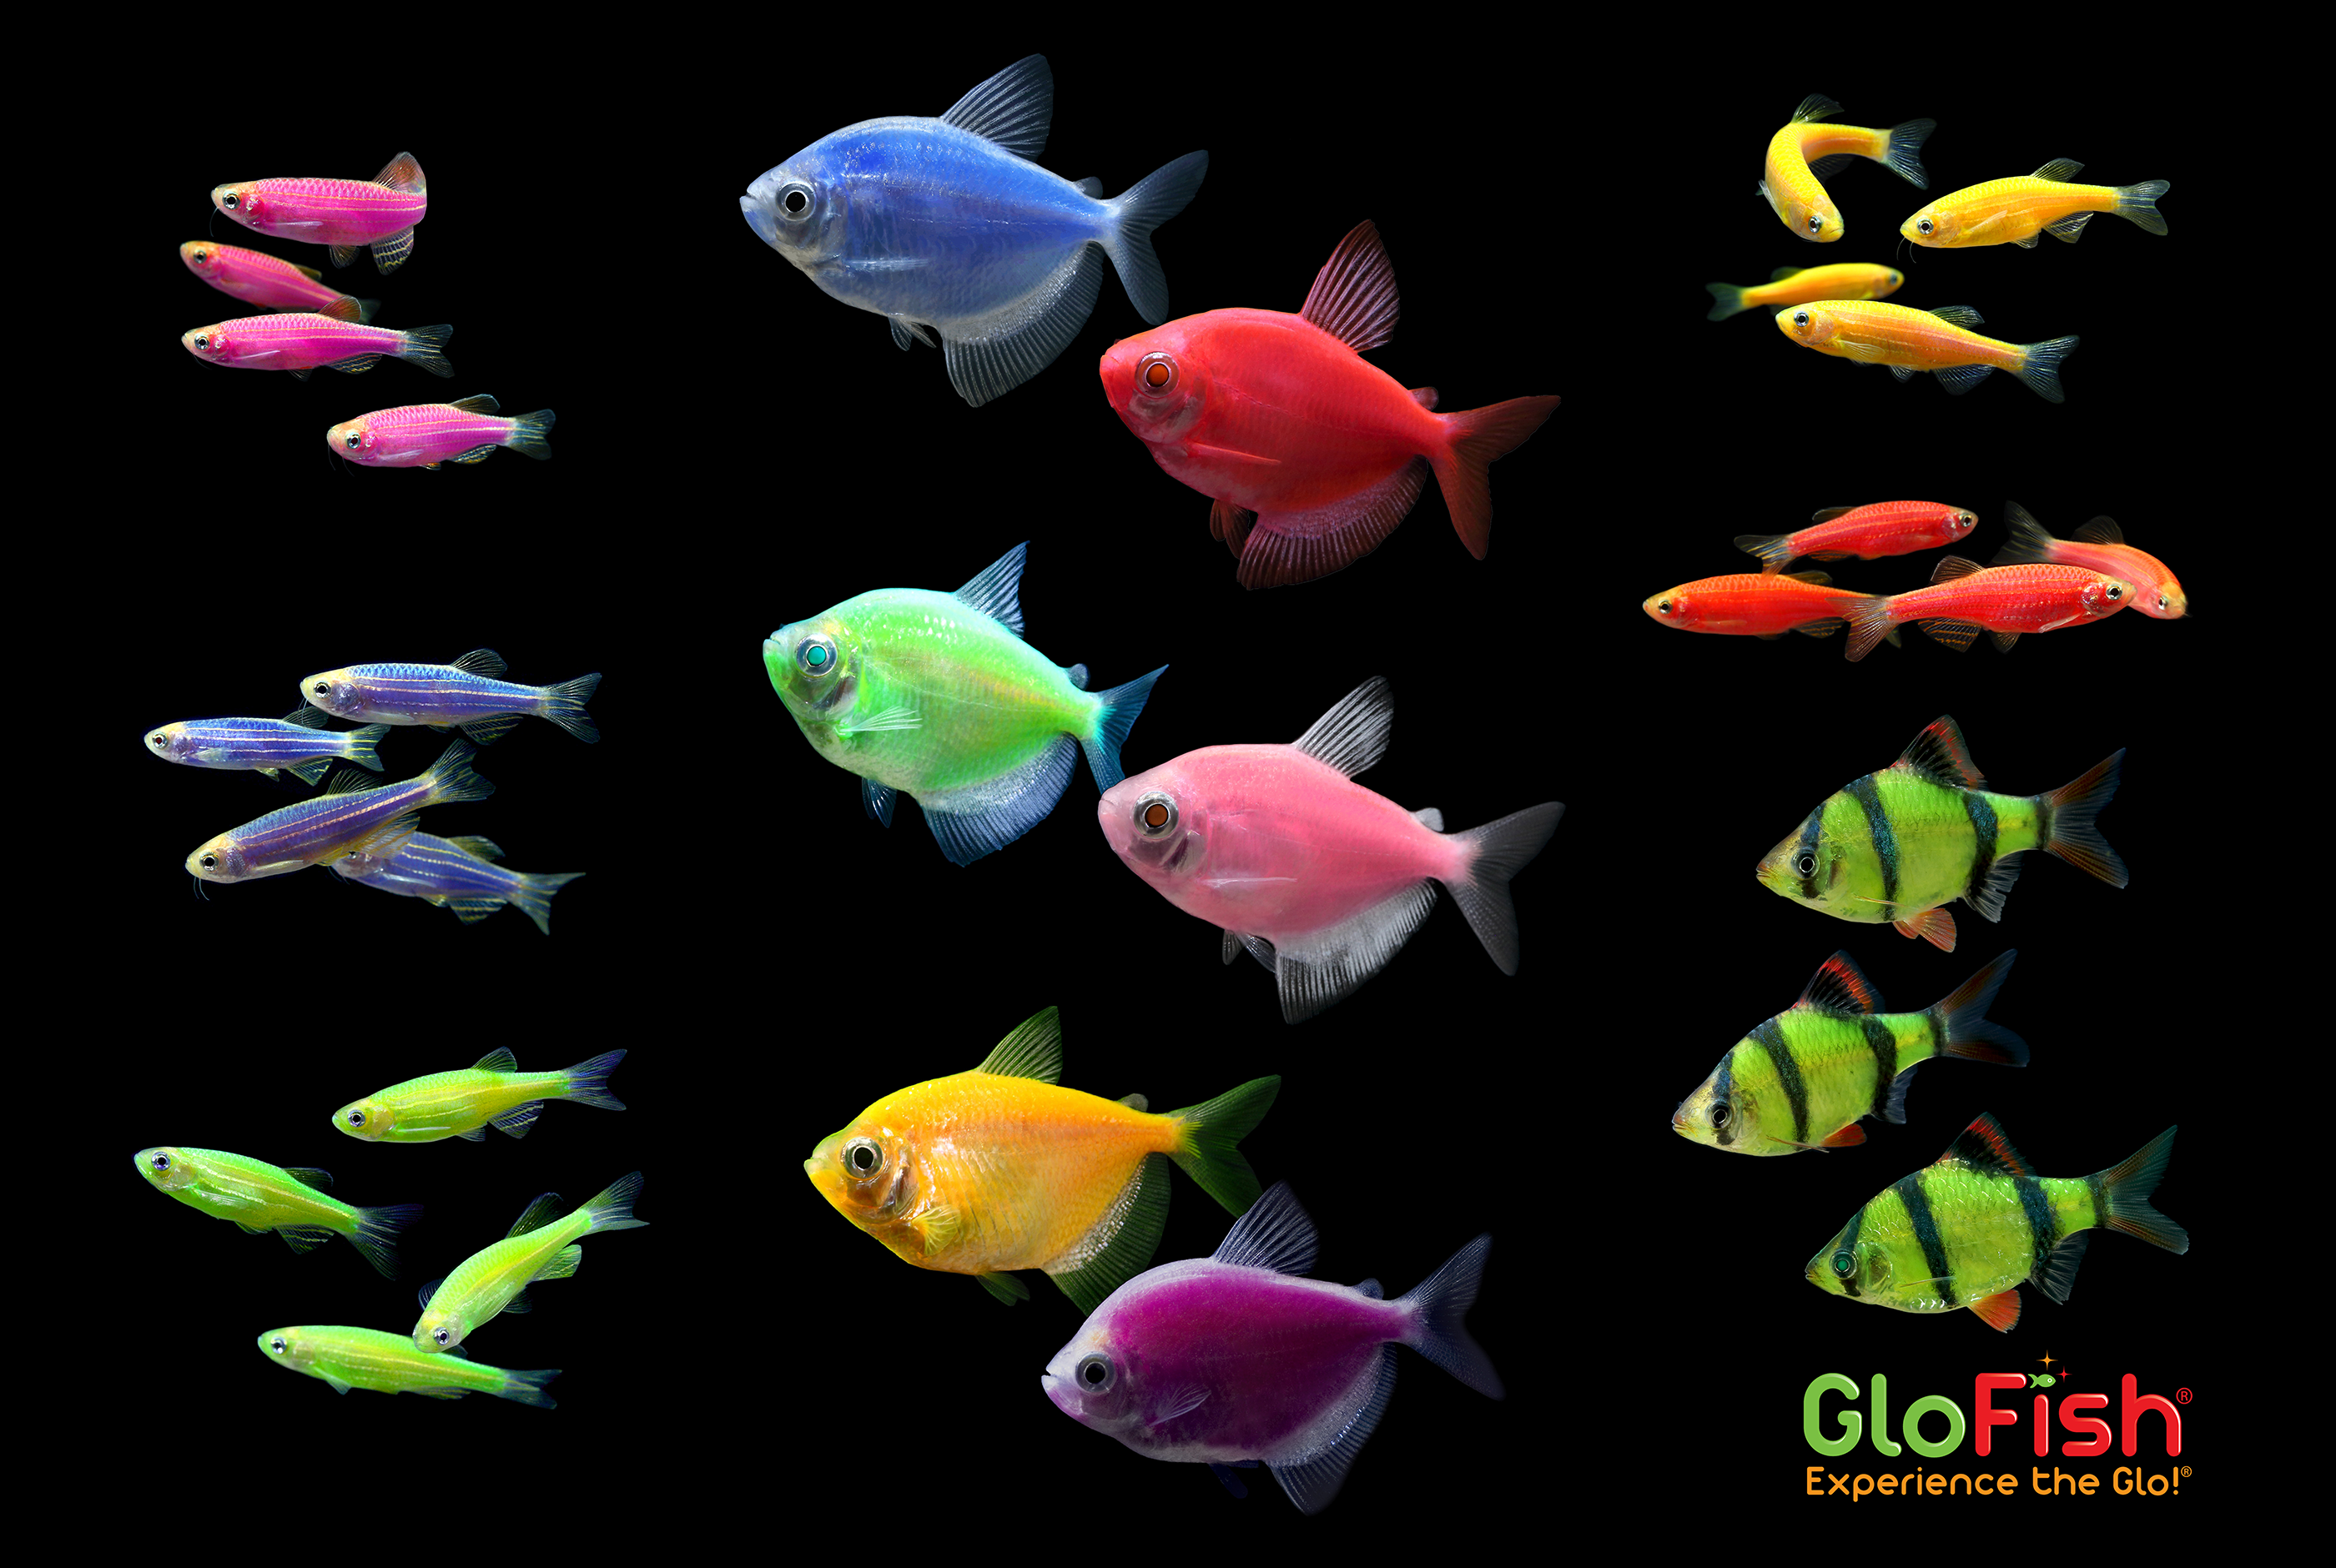 10+ Fish Starts With G